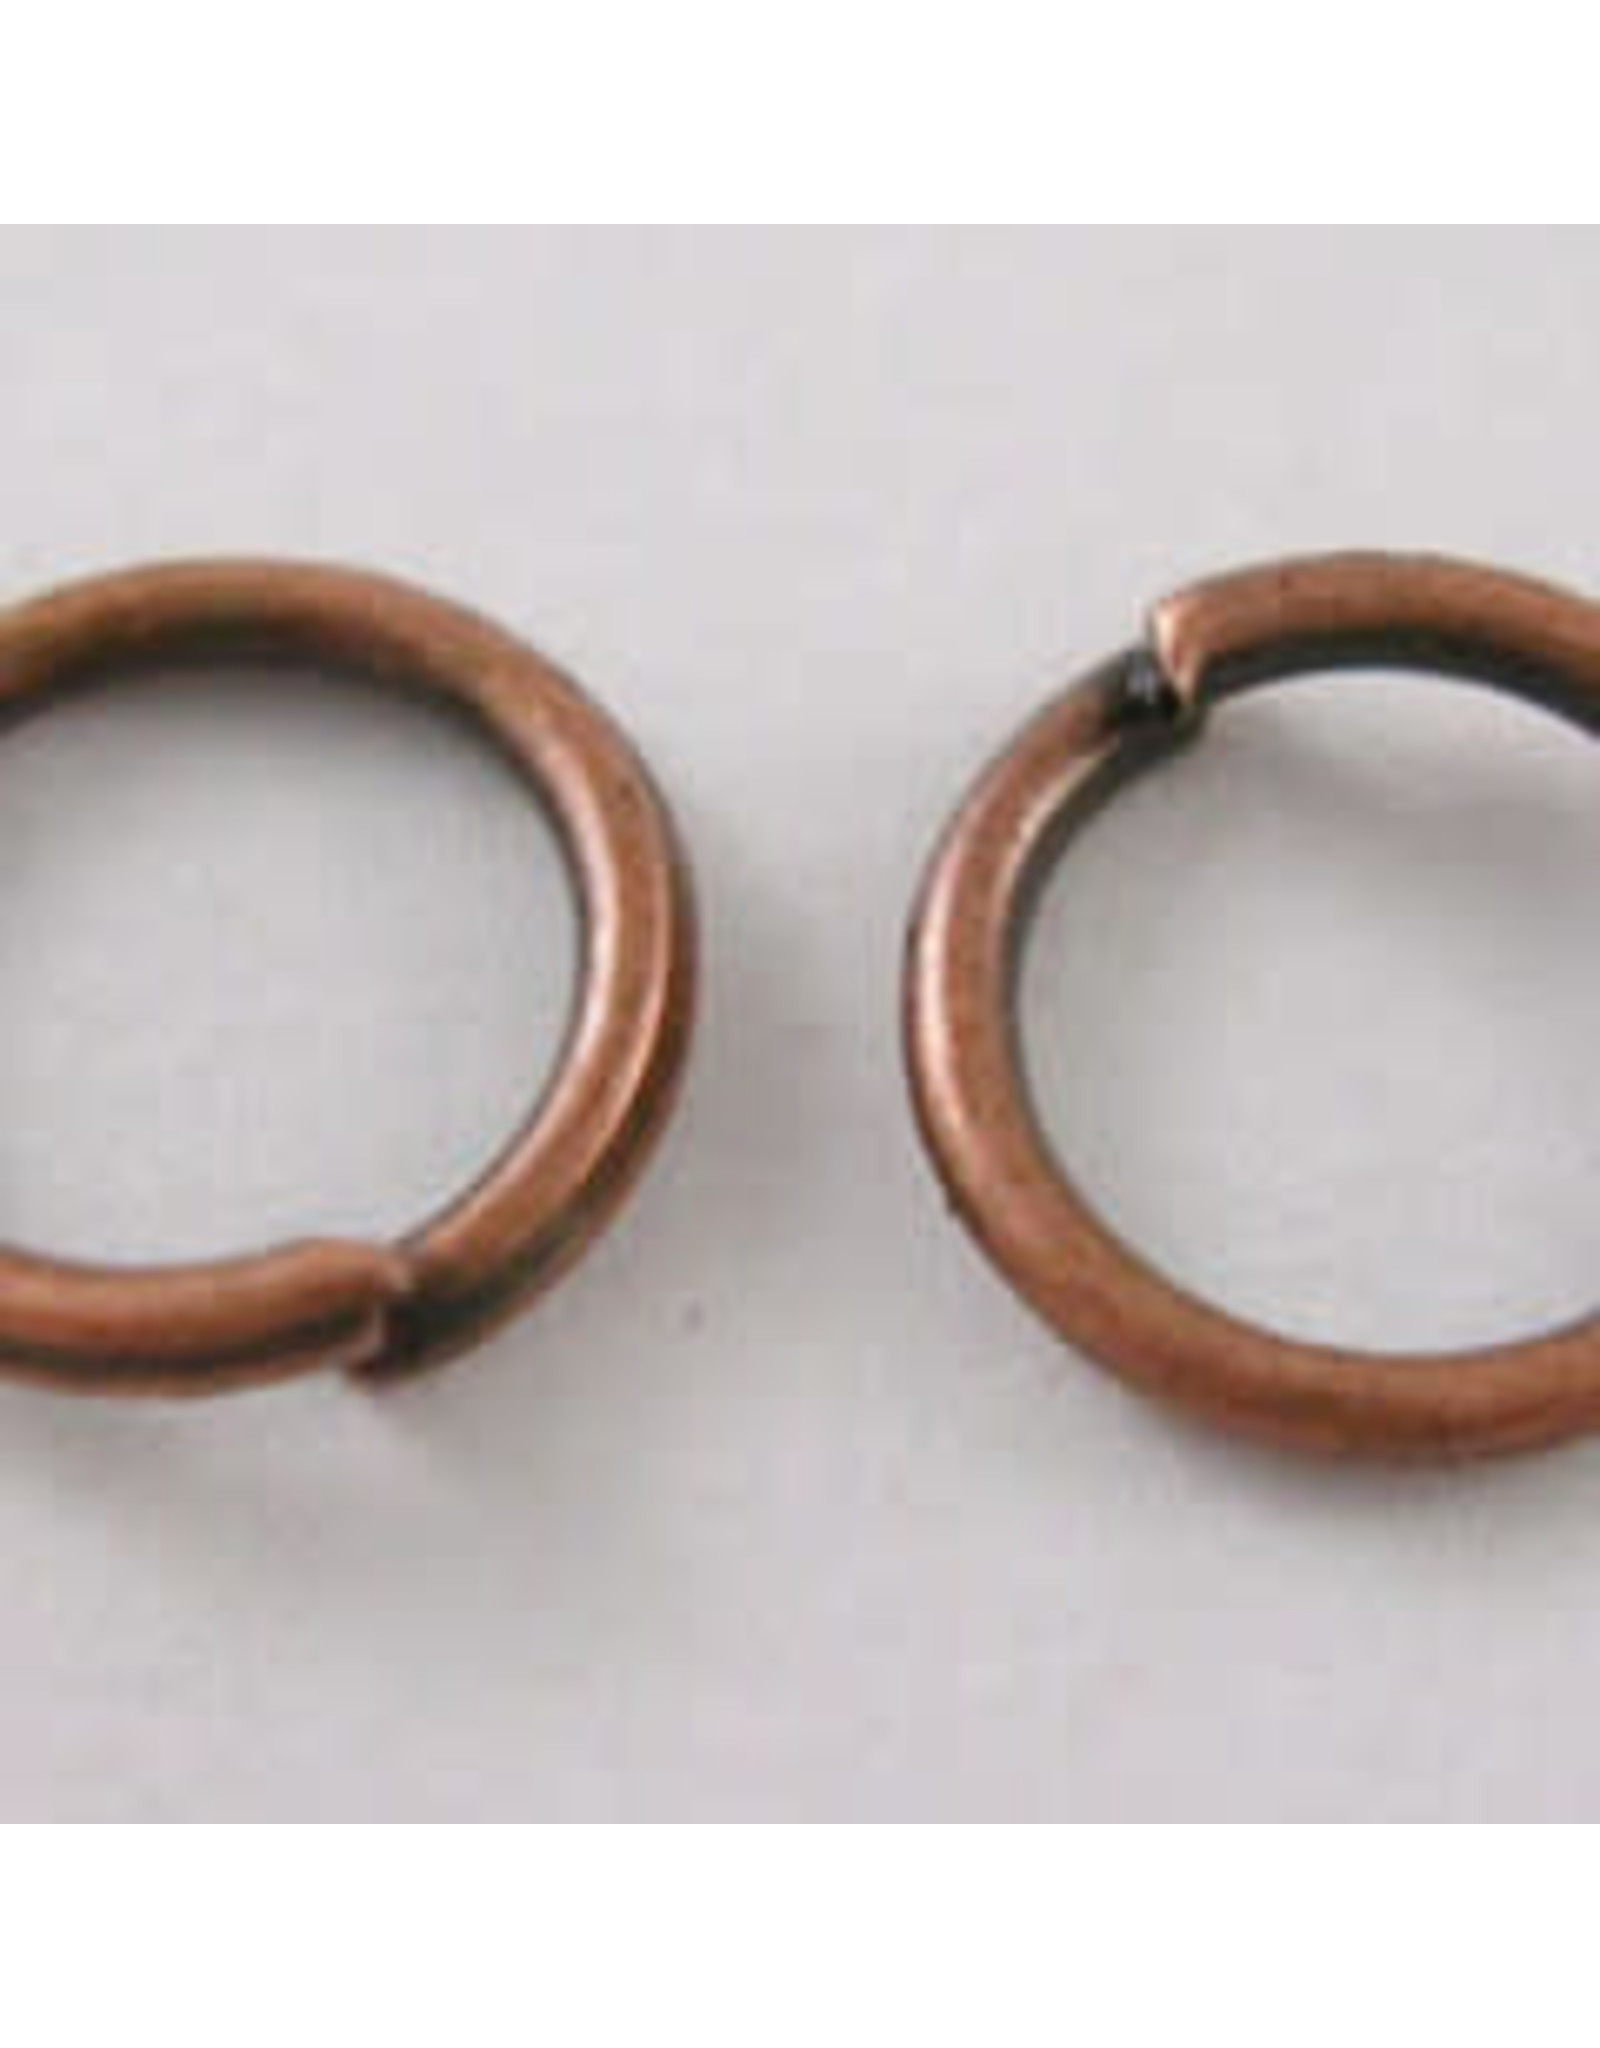 Jump Ring 6mm Antique Copper  approx 22g  x500